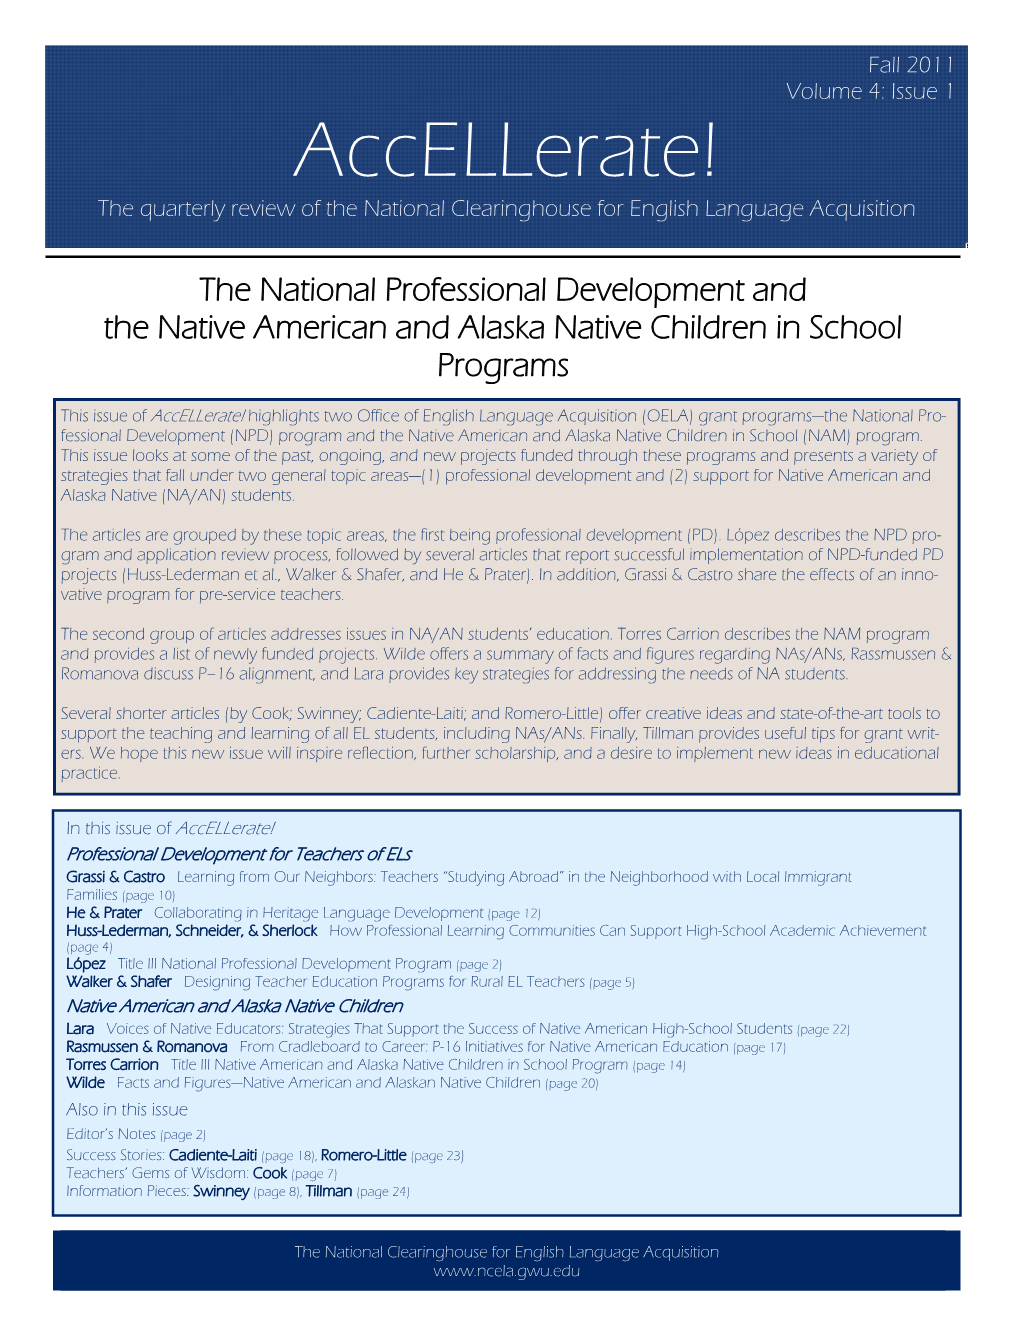 Accellerate! the Quarterly Review of the National Clearinghouse for English Language Acquisition